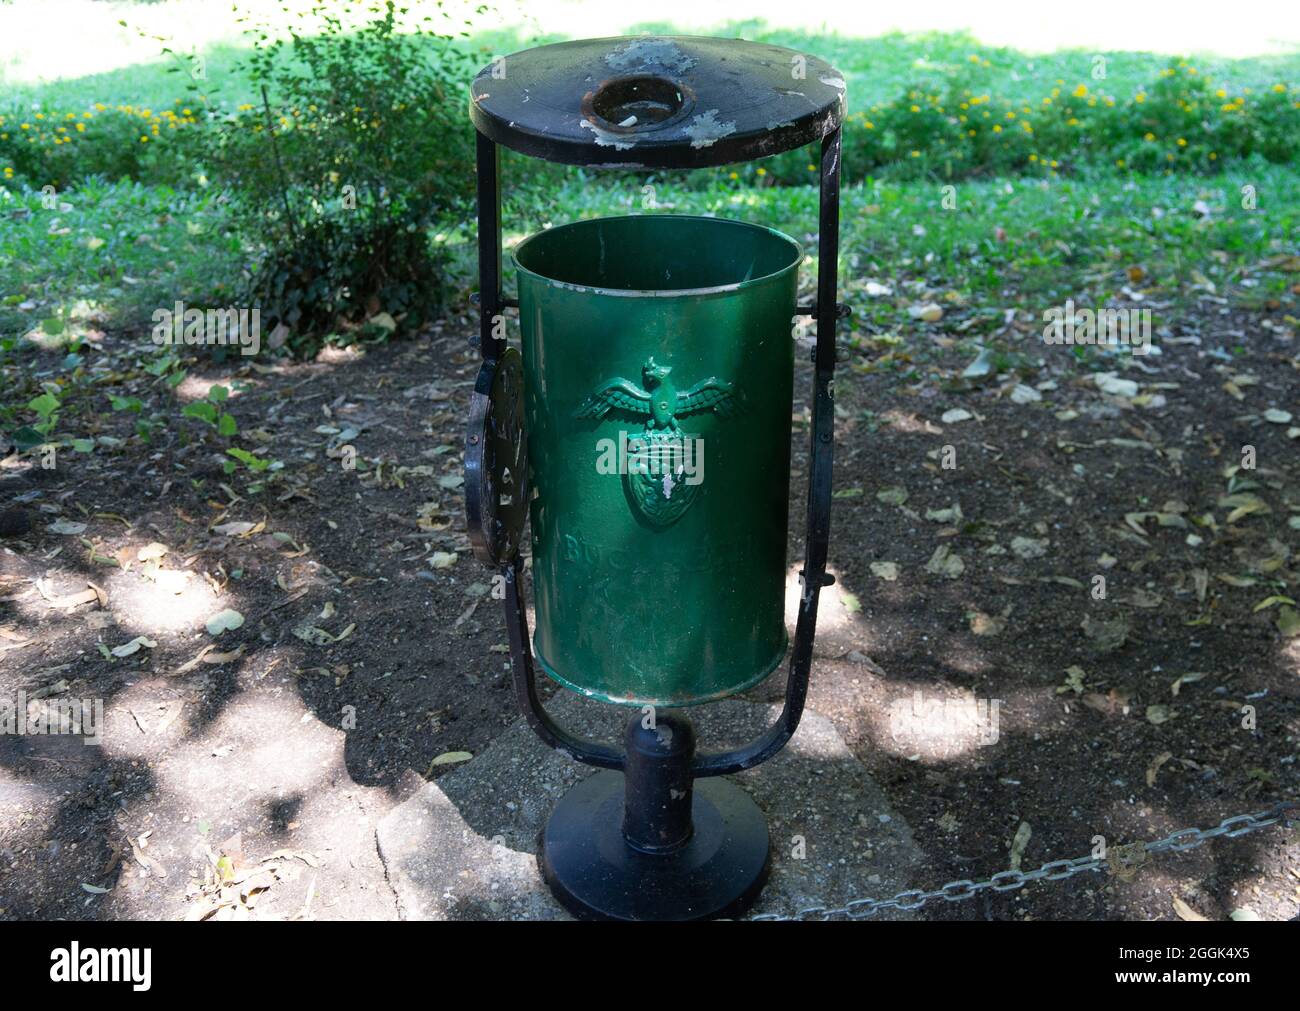 https://c8.alamy.com/comp/2GGK4X5/outdoor-metal-public-trash-can-close-up-garbage-can-in-a-public-park-in-bucharest-romania-2021-2GGK4X5.jpg